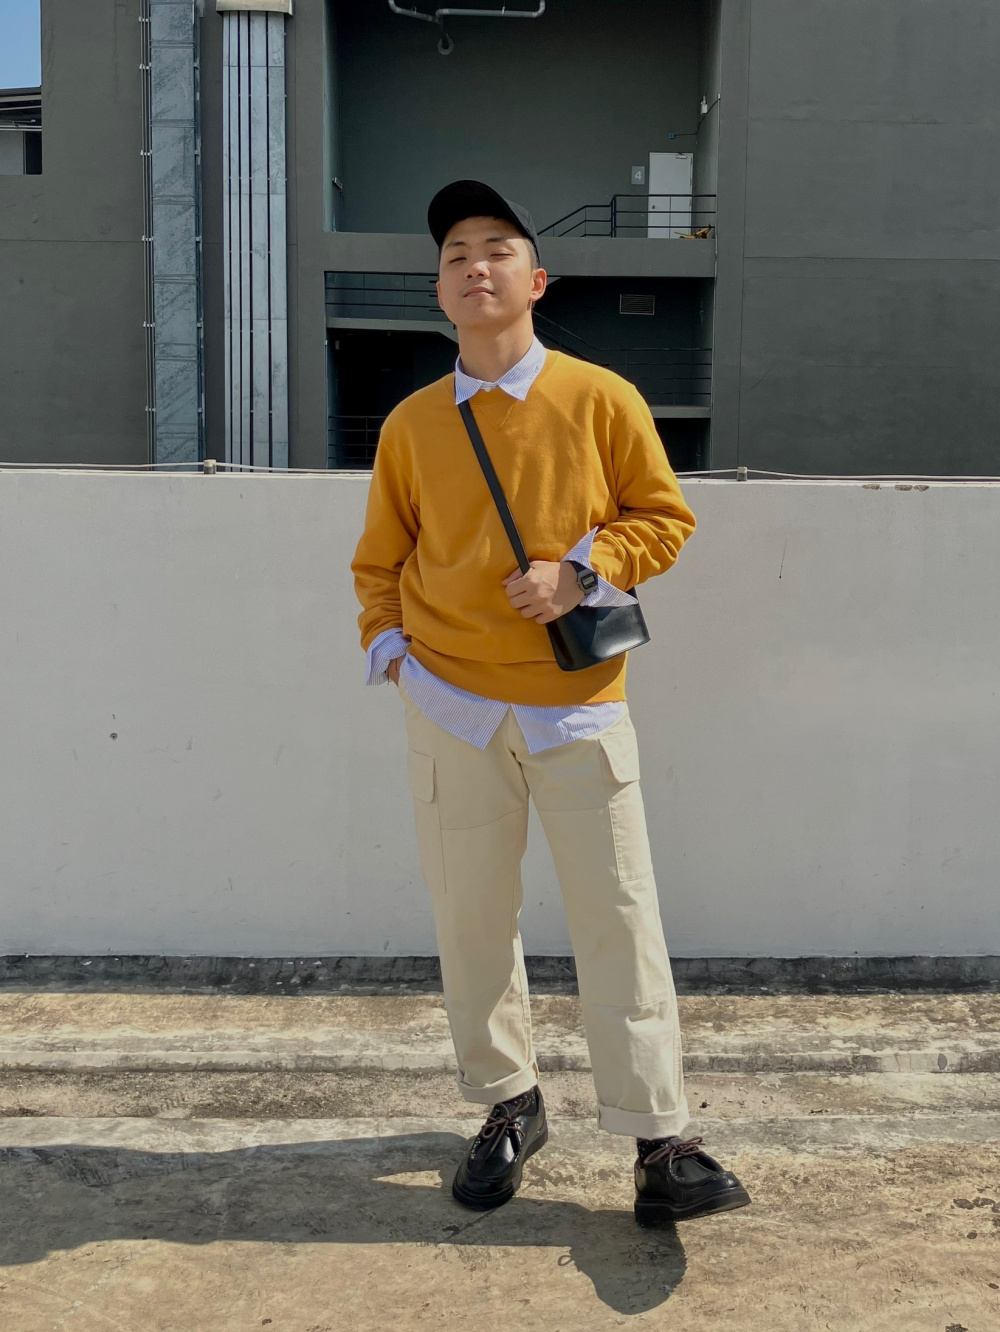 Check styling ideas for「Cargo pants」